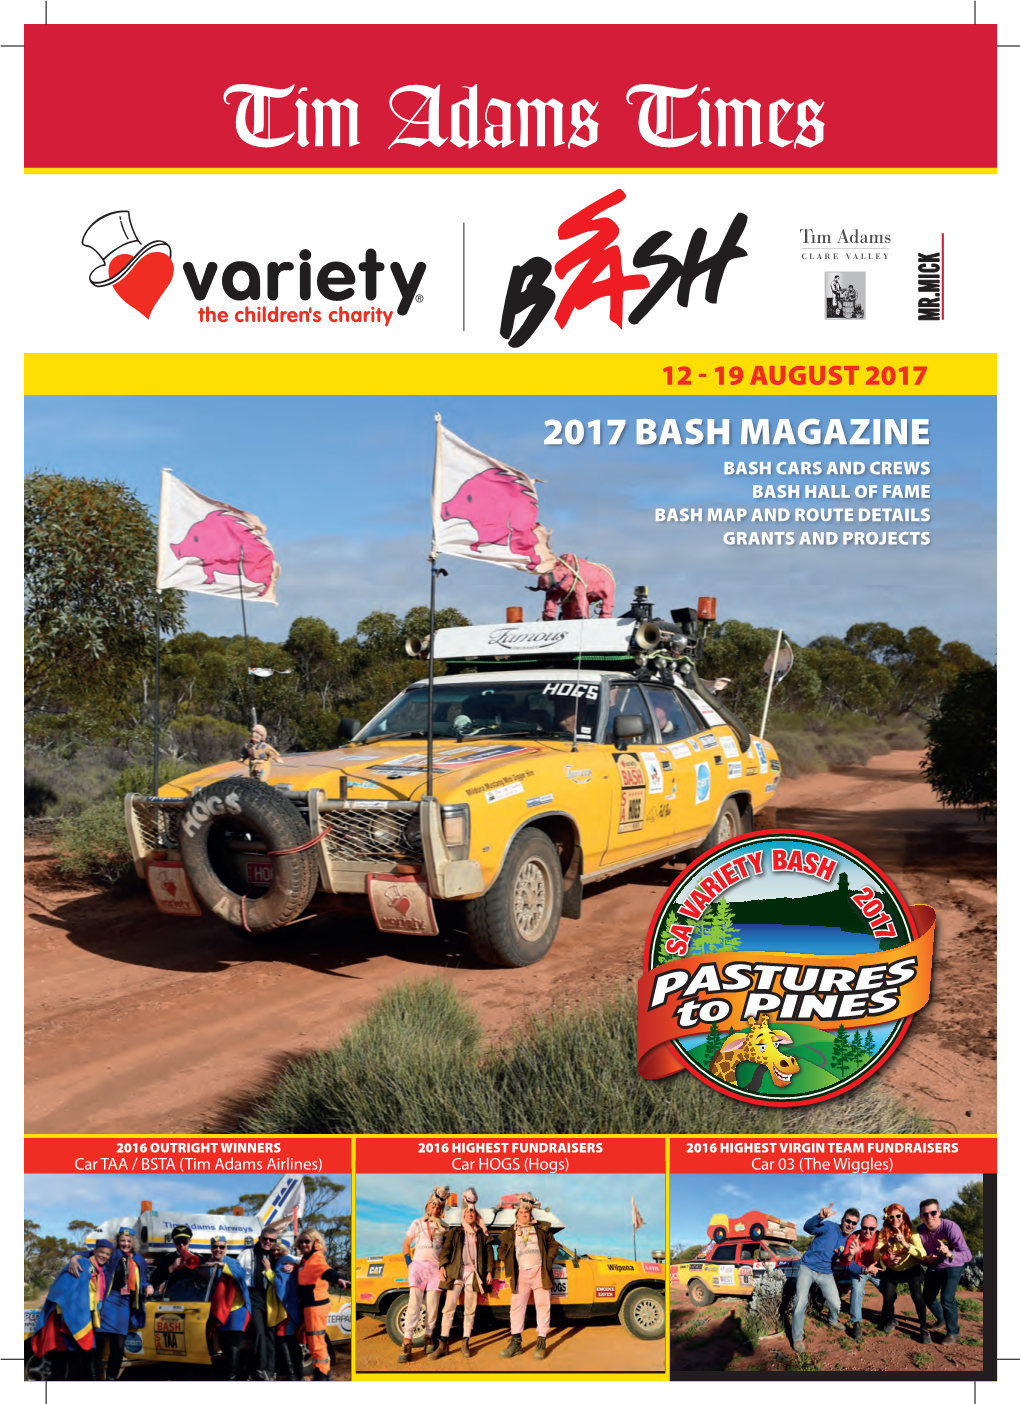 2017 Bash Magazine Bash Cars and Crews Bash Hall of Fame Bash Map and Route Details Grants and Projects